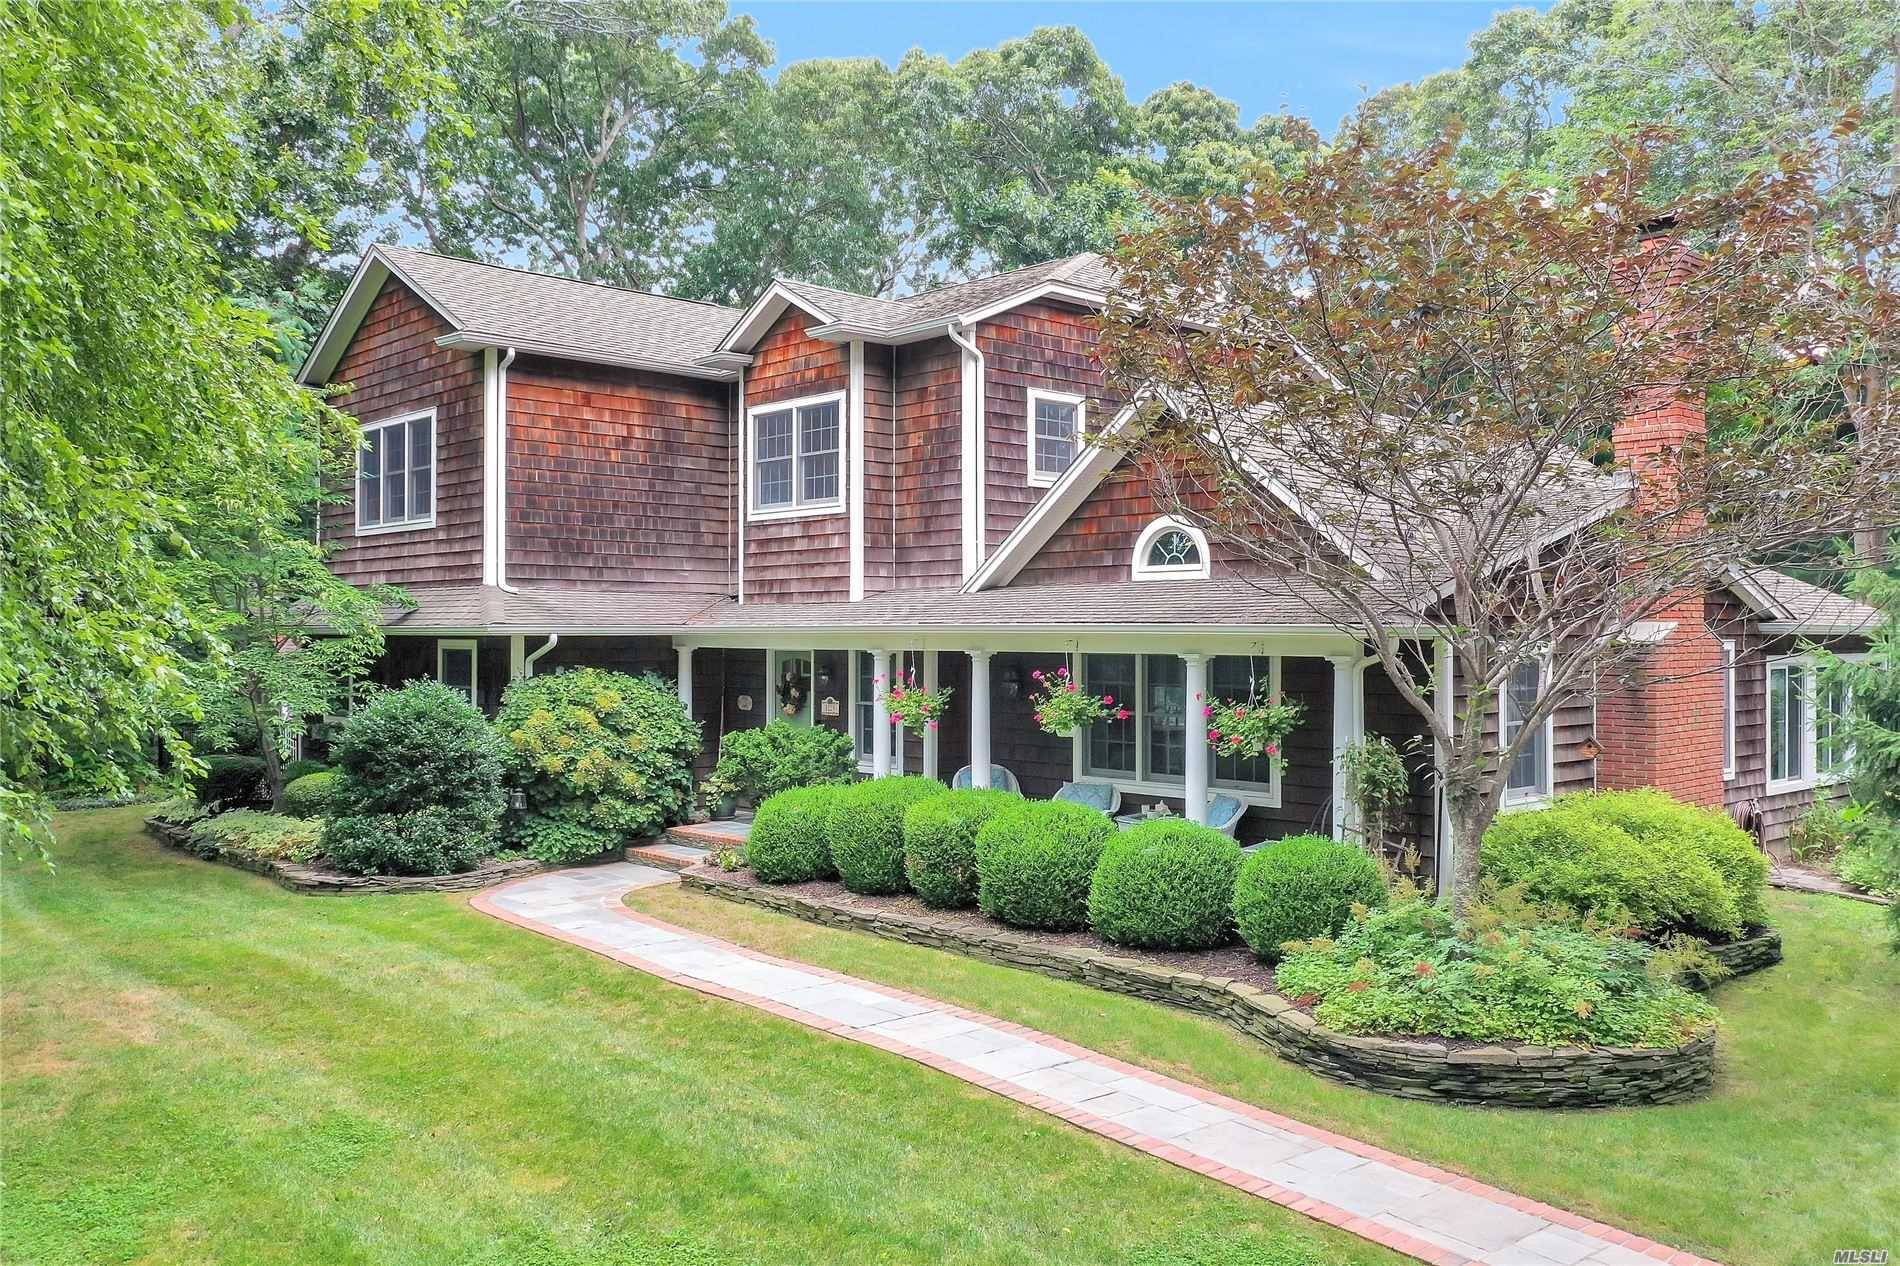 Arrowhead Cove in Peconic Rare opportunity to own this 5 bedroom, 3 bath Cedar shingled residence in this very special location on the North Fork.